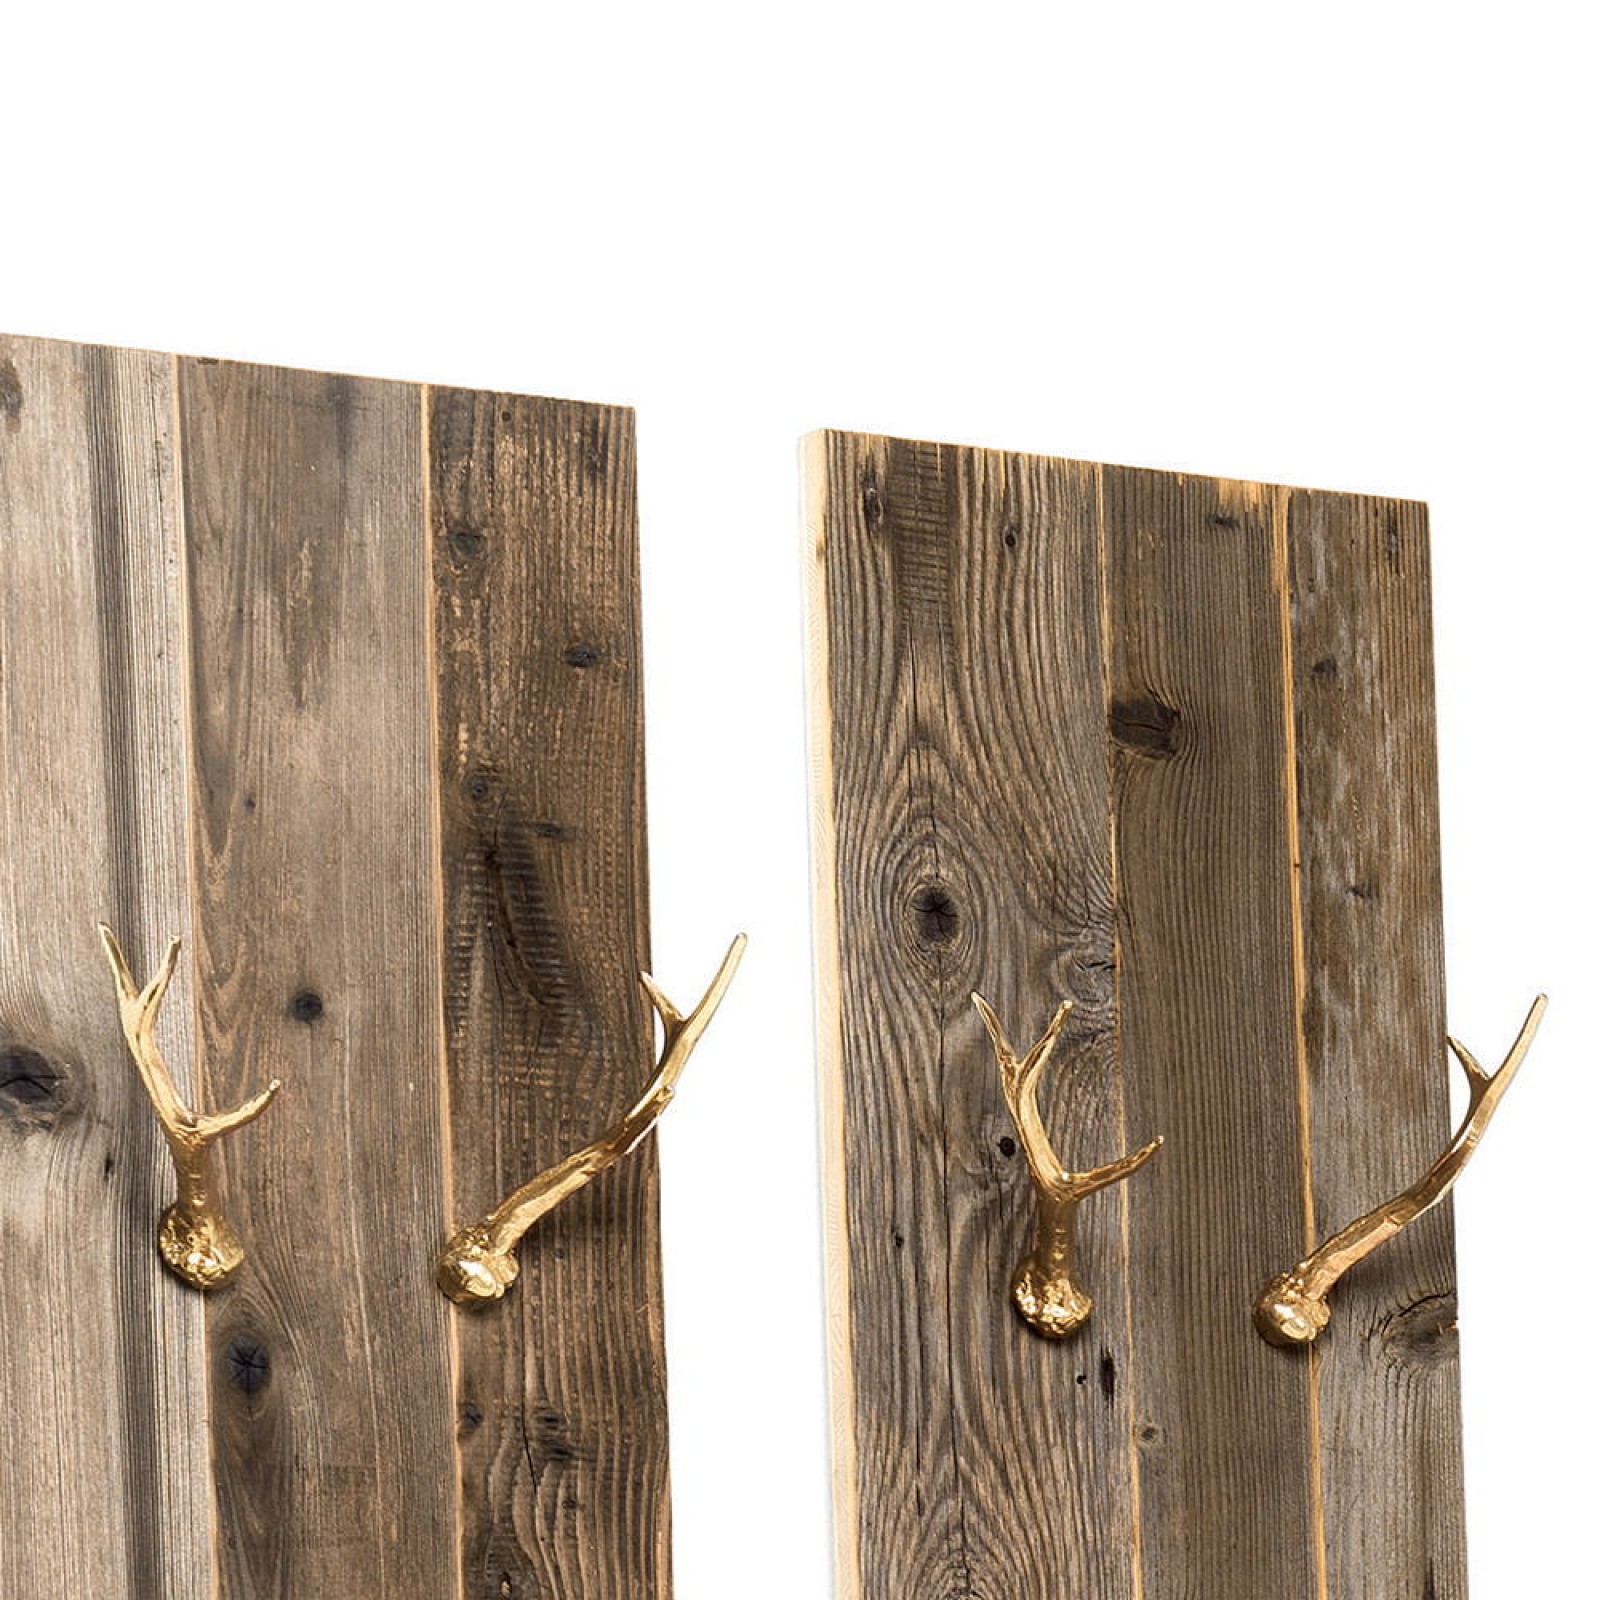 Plank Wood Wall Decor With Hooks